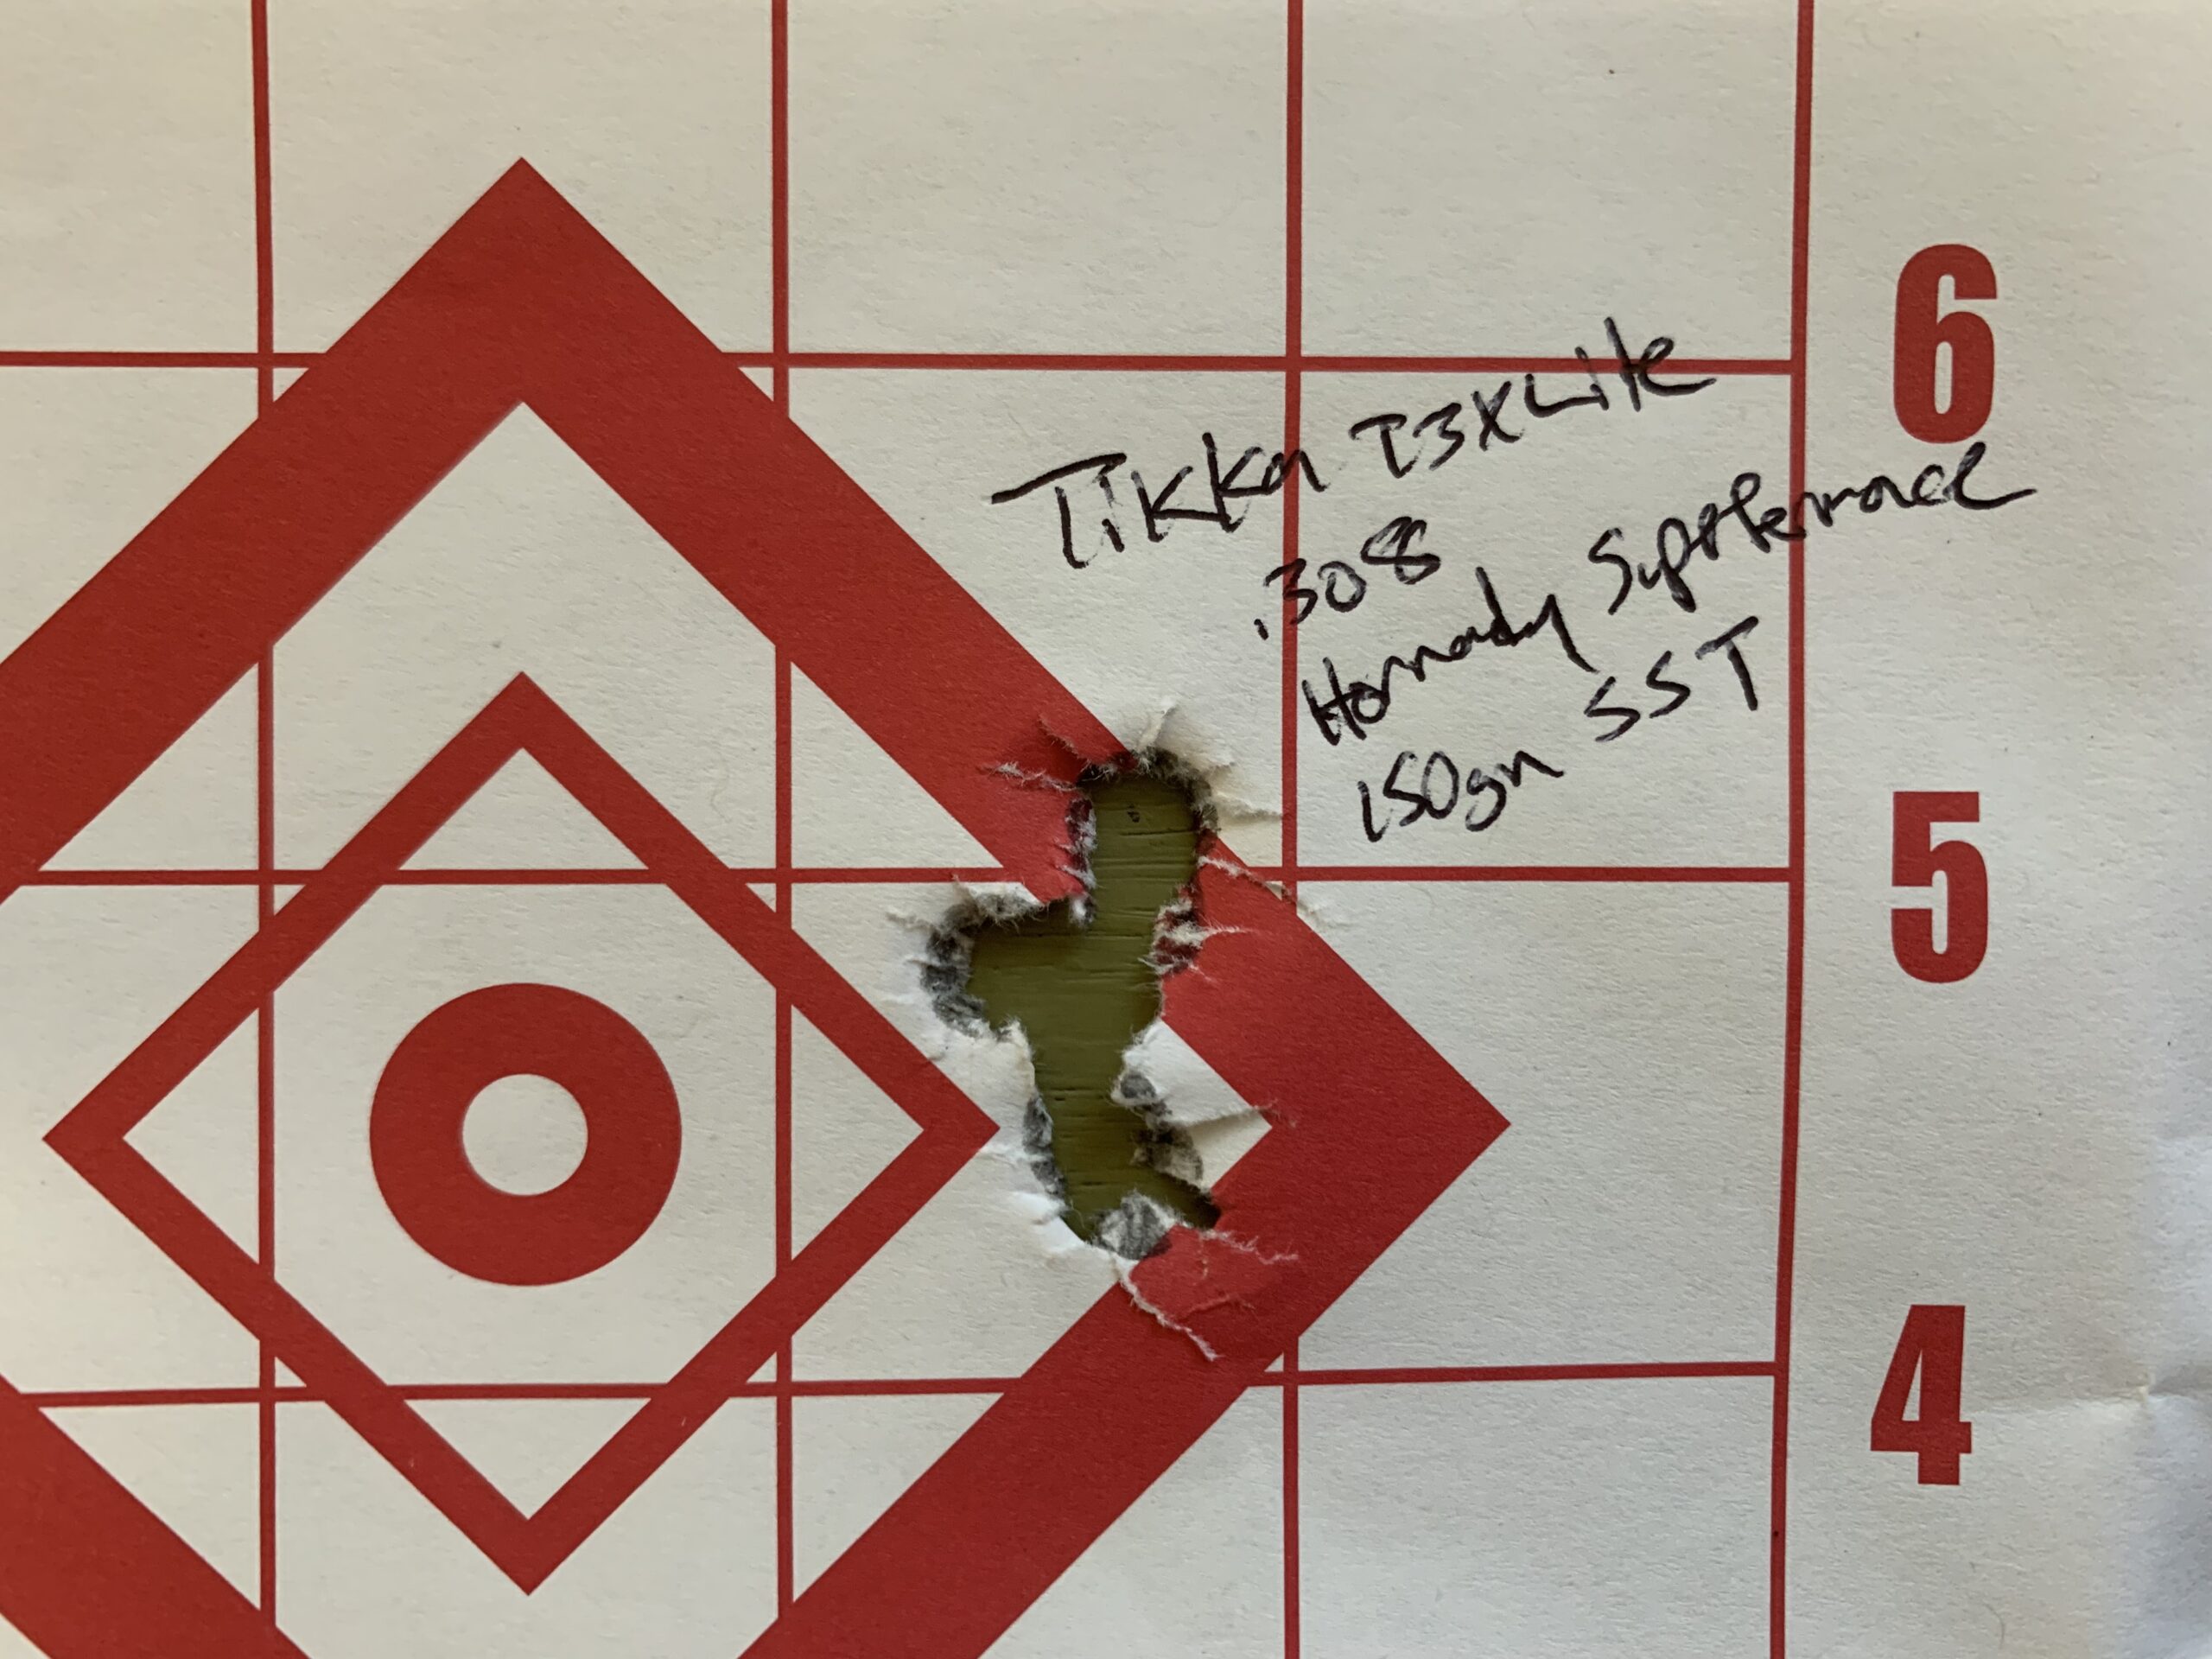 An excellent 5-shot group from the Tikka T3X Lite